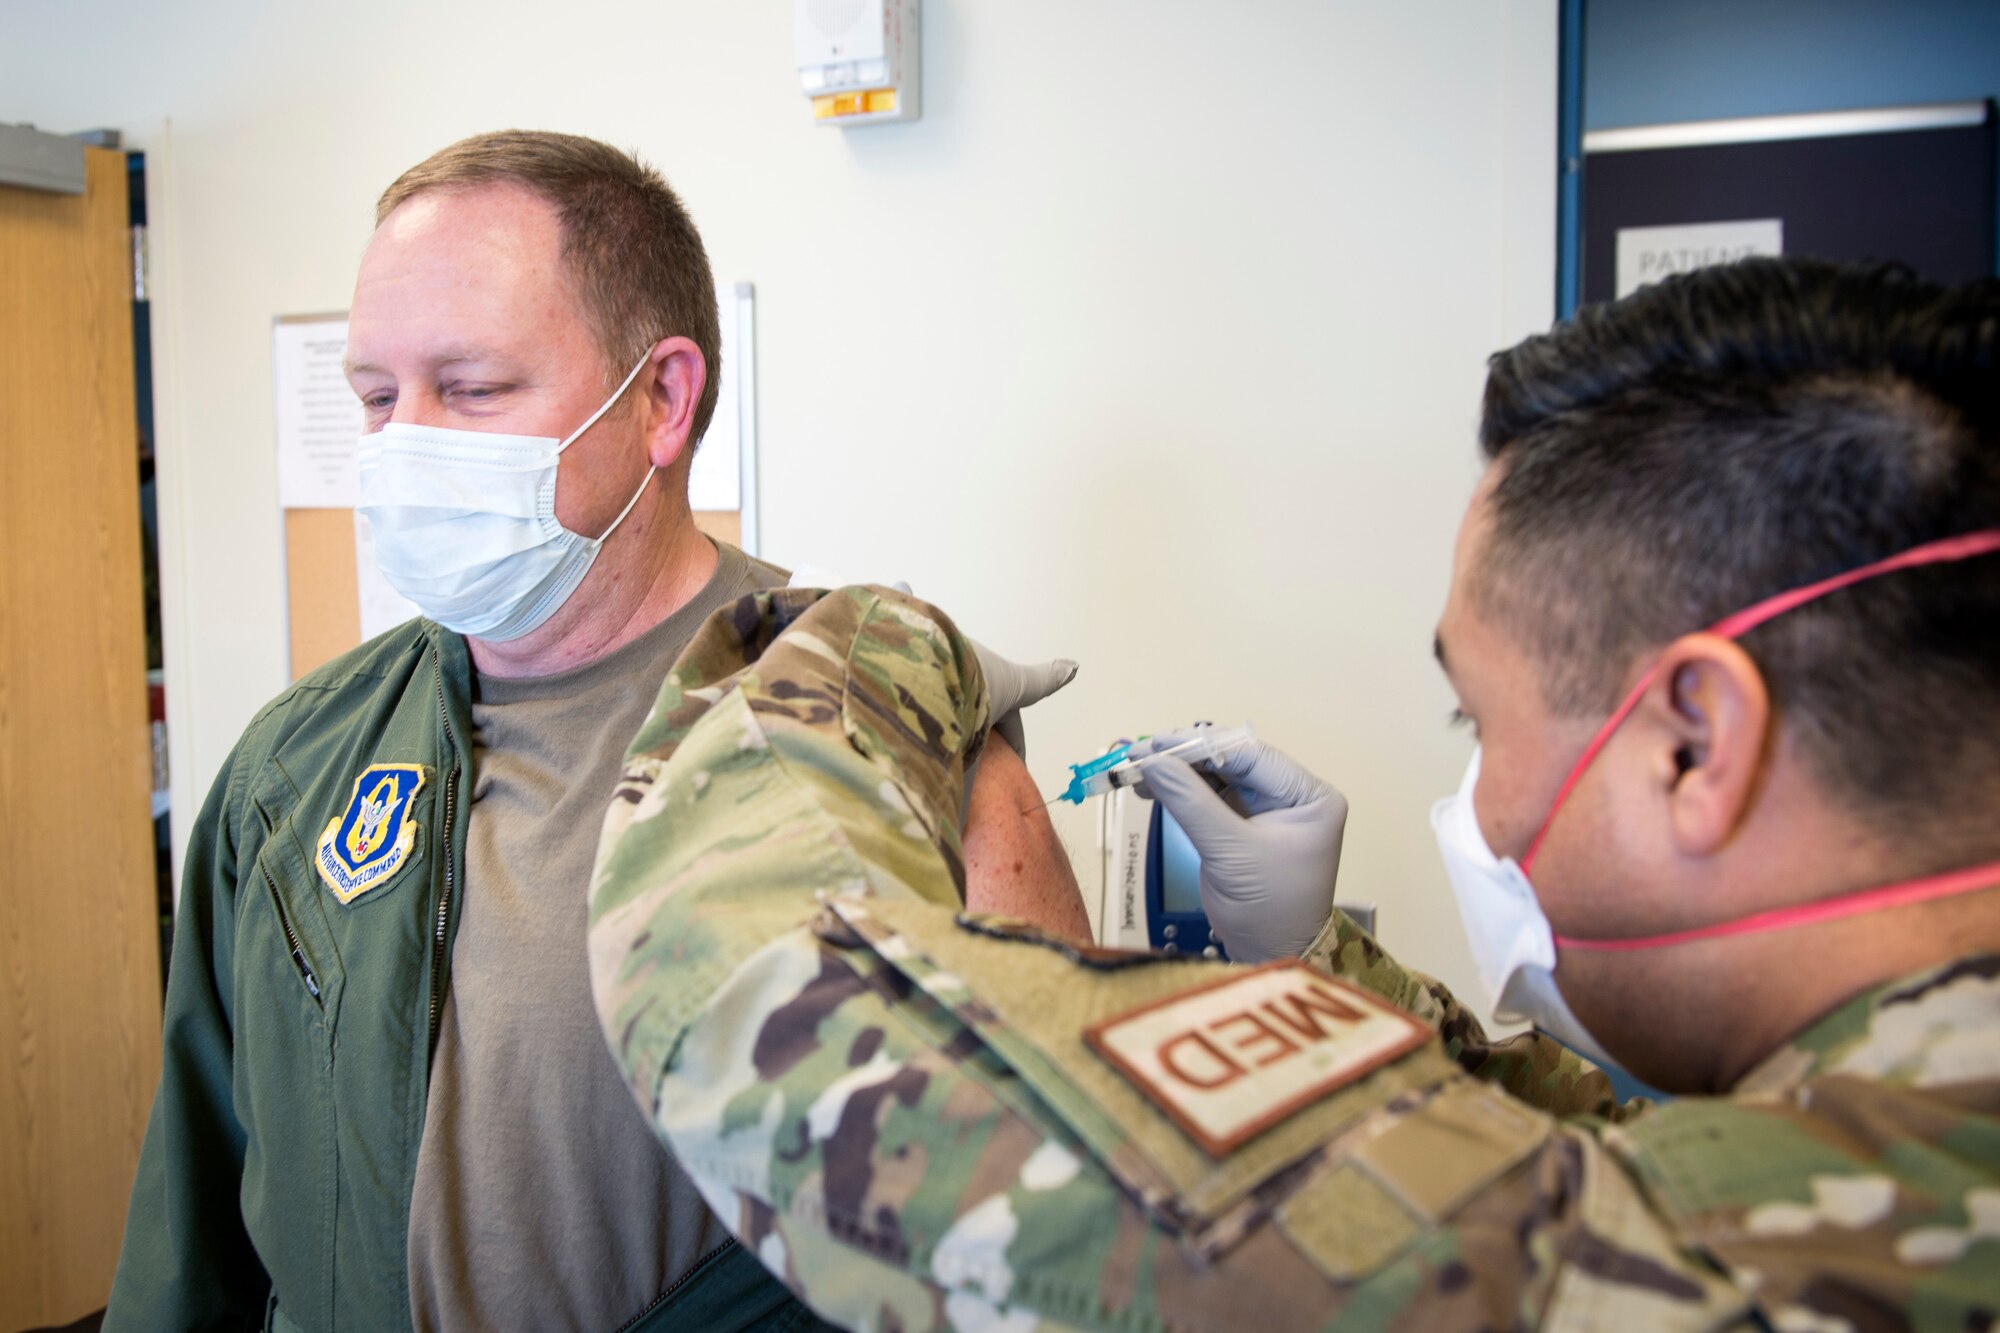 Col. (Dr.) Bill Bray, 434th Aerospace Medicine Squadron flight surgeon, receives the Moderna COVID-19 vaccine at Grissom Air Reserve Base, Ind., Feb. 1, 2021. Bray was the first member at Grissom to receive the vaccine through the 434th AMDS clinic. (U.S. Air Force photo/Master Sgt. Ben Mota)